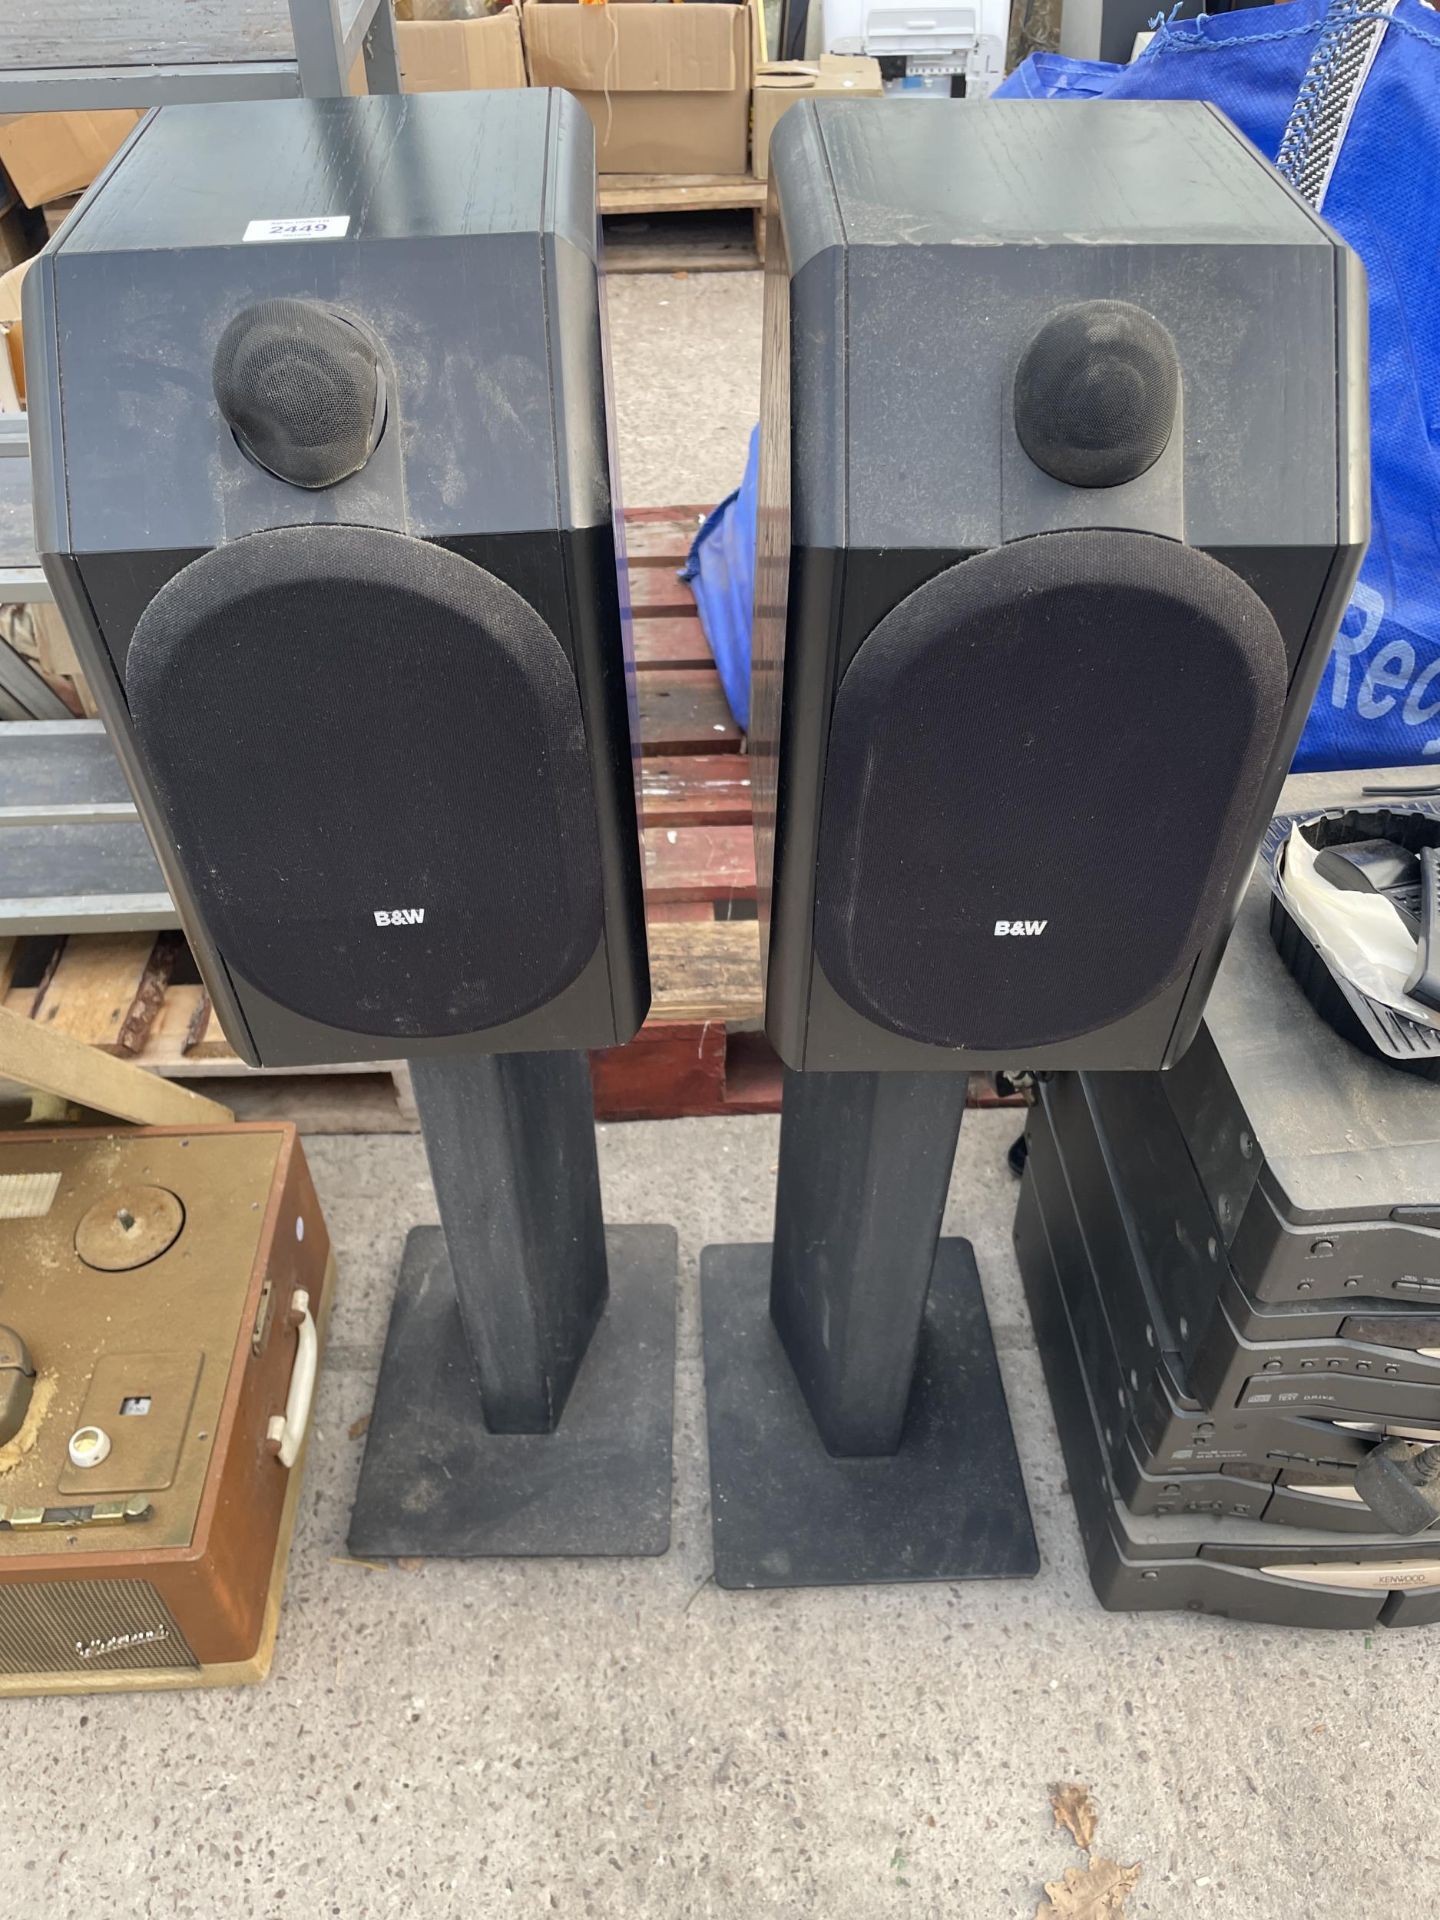 A PAIR OF B&W SPEAKERS ON STANDS